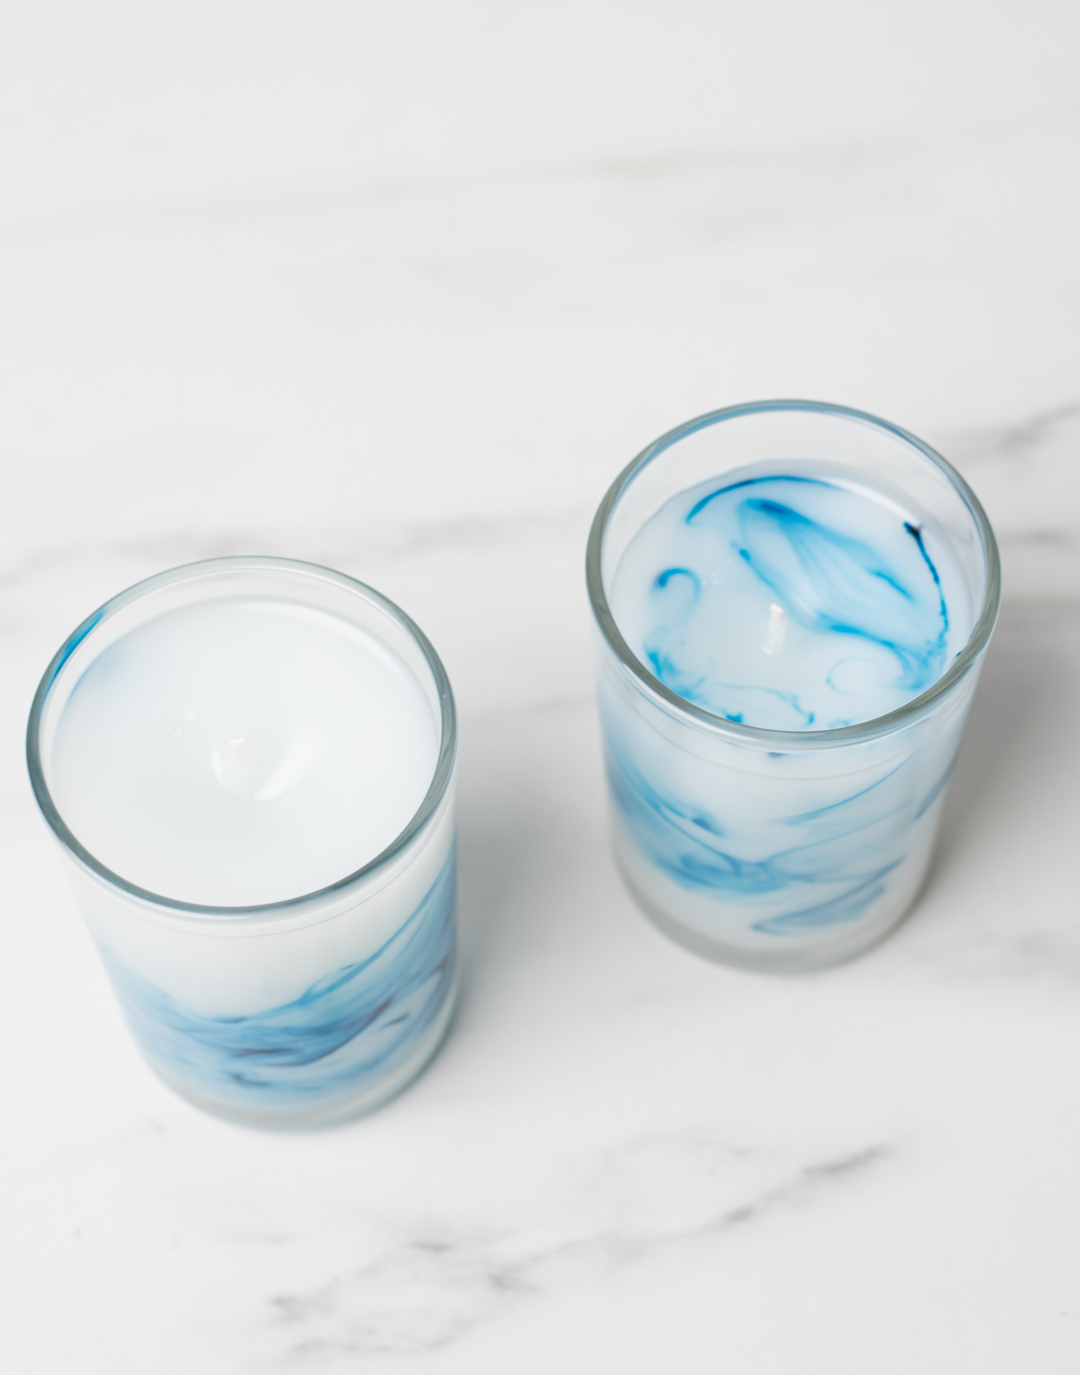 Cooled marbled candles.